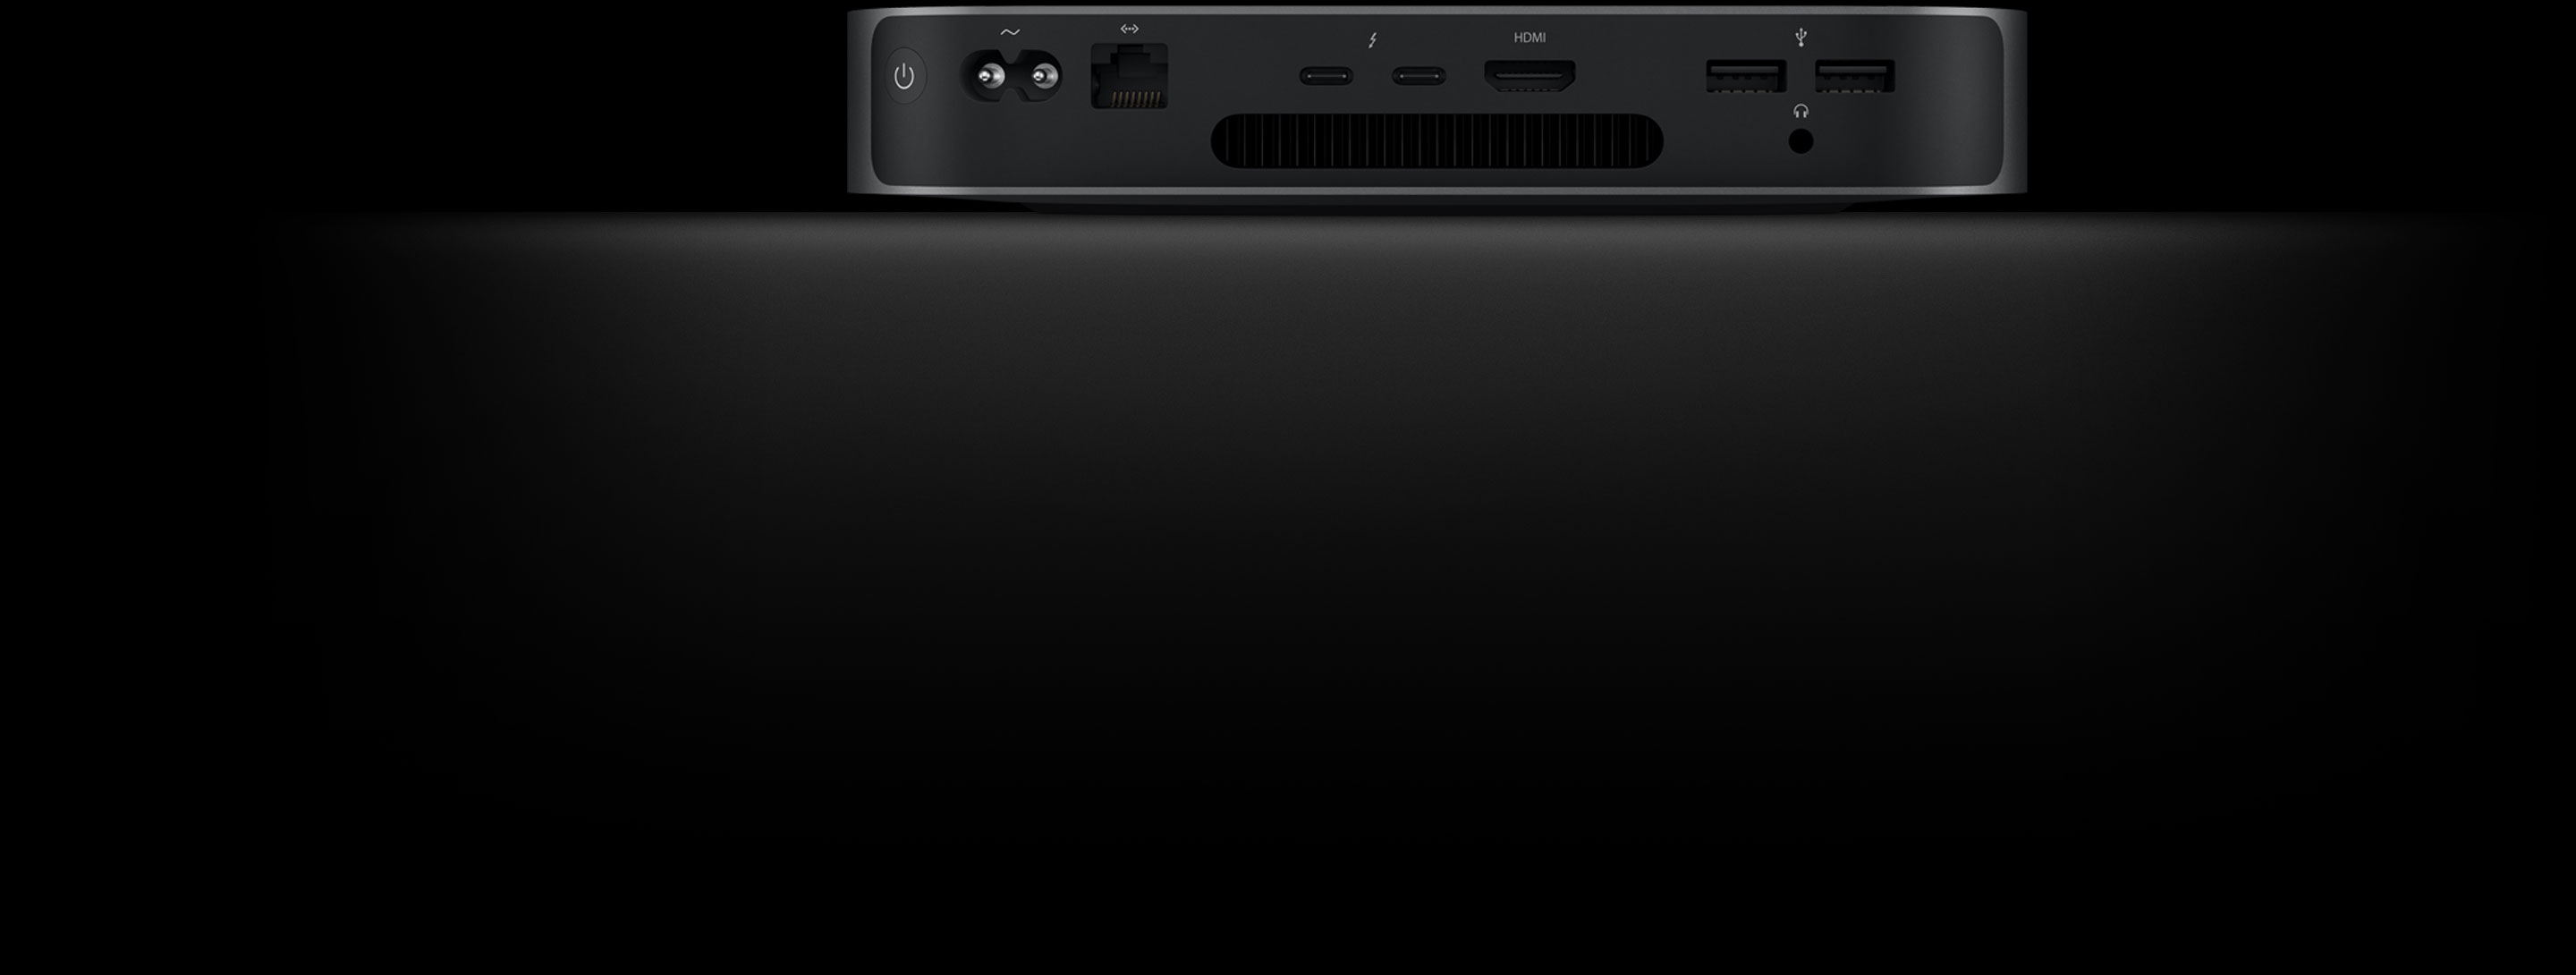 is thunderbolt to hdmi an option for mid 2011 mac mini monitor